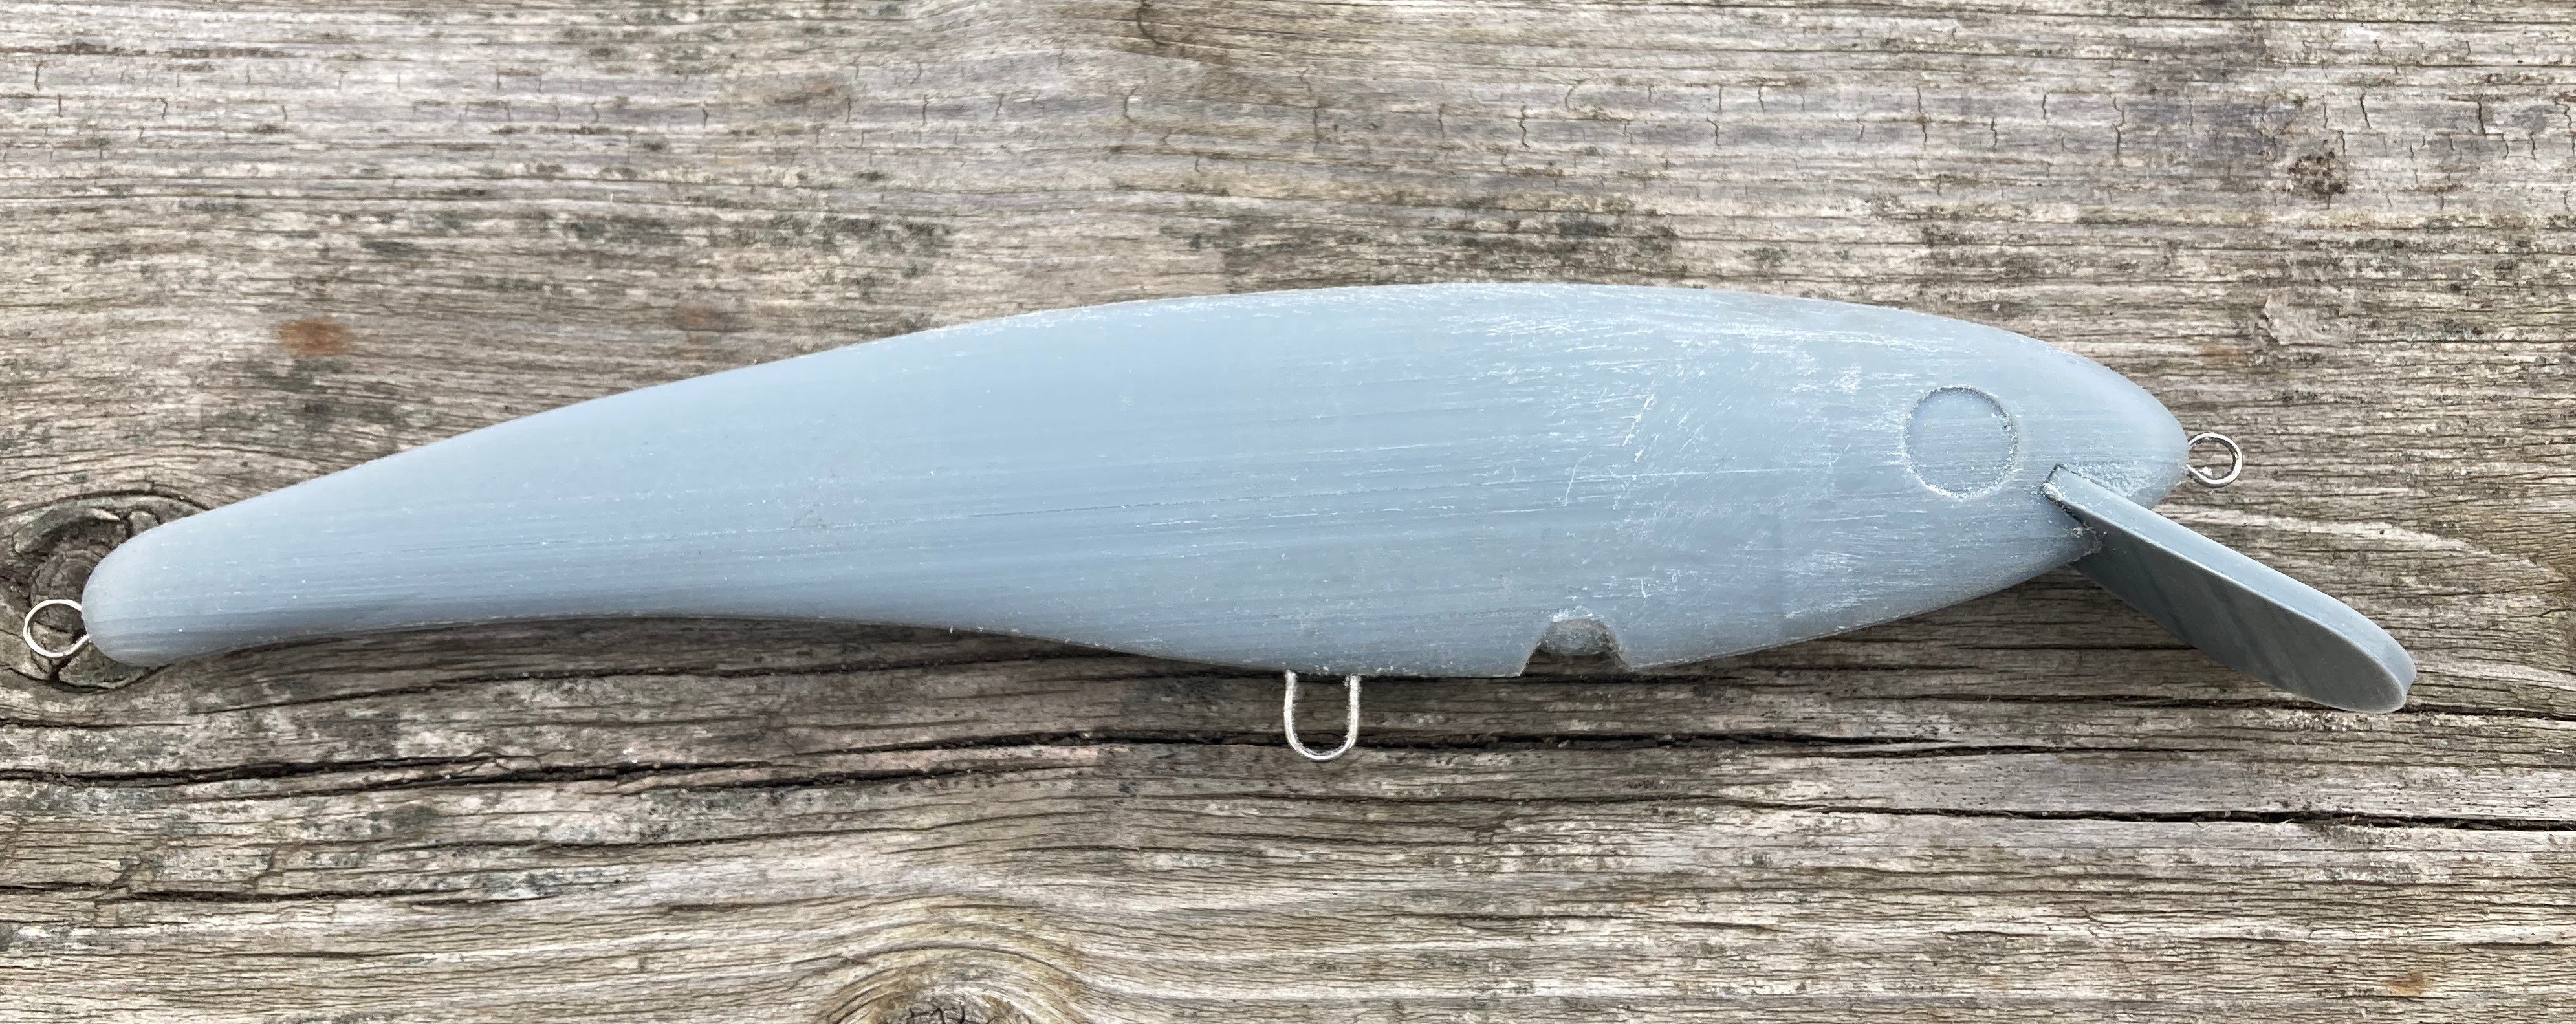 Any thoughts or tips on using PLA printed injection molds for soft plastic  lures? Should I coat the mold with epoxy? Only use the print to cast a silicon  mold? Other half